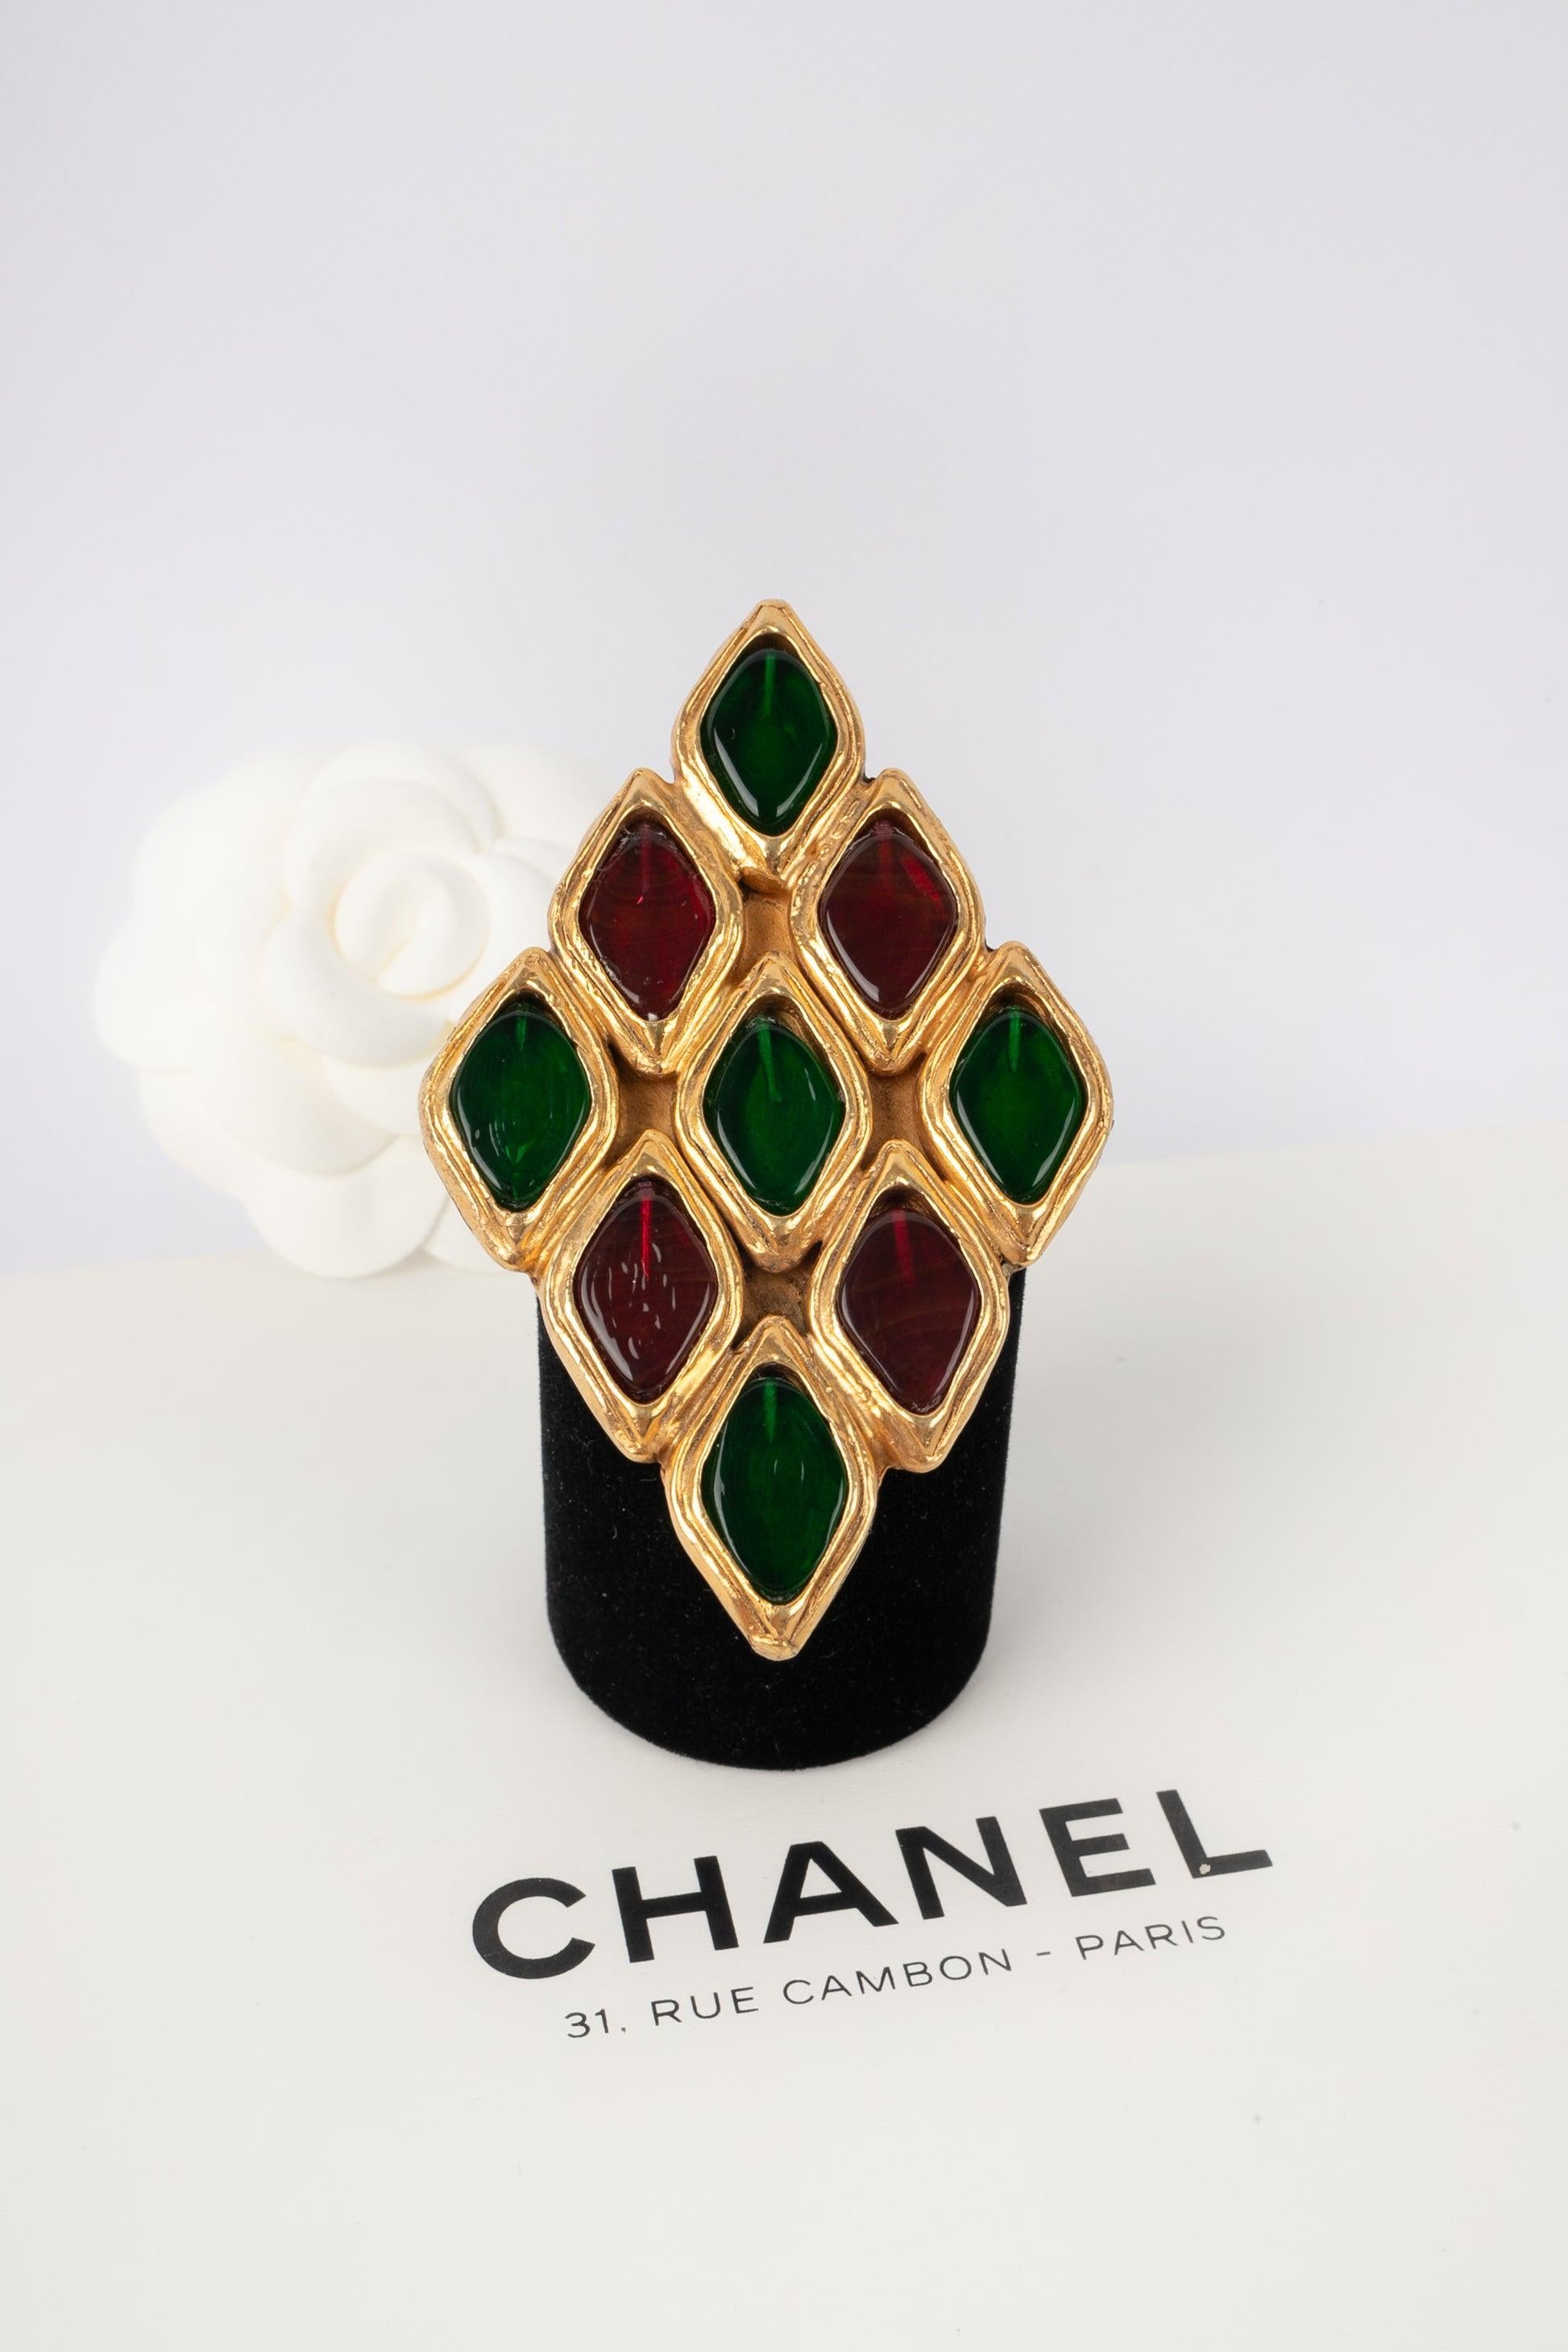 Chanel Golden Metal Brooch with Diamond Shape For Sale 3